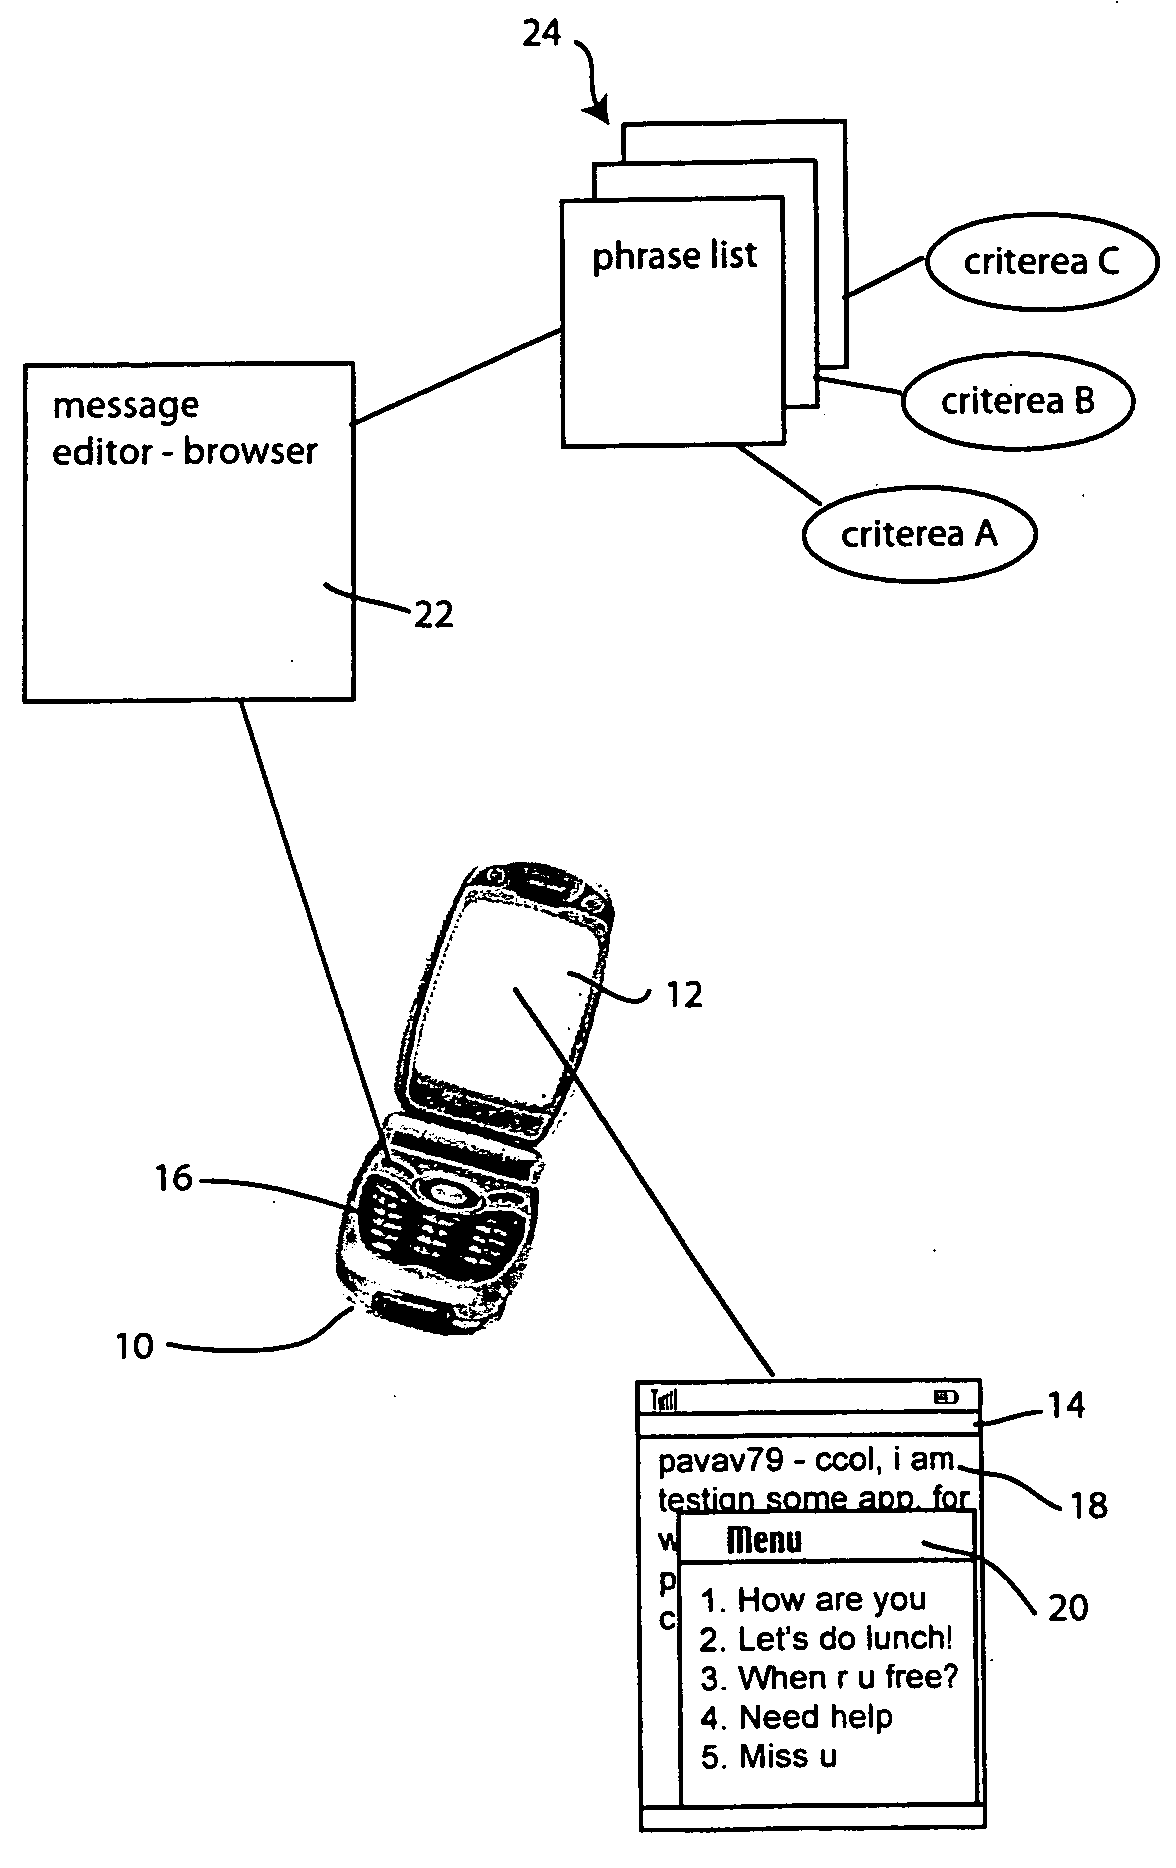 Method for creating and using phrase history for accelerating instant messaging input on mobile devices